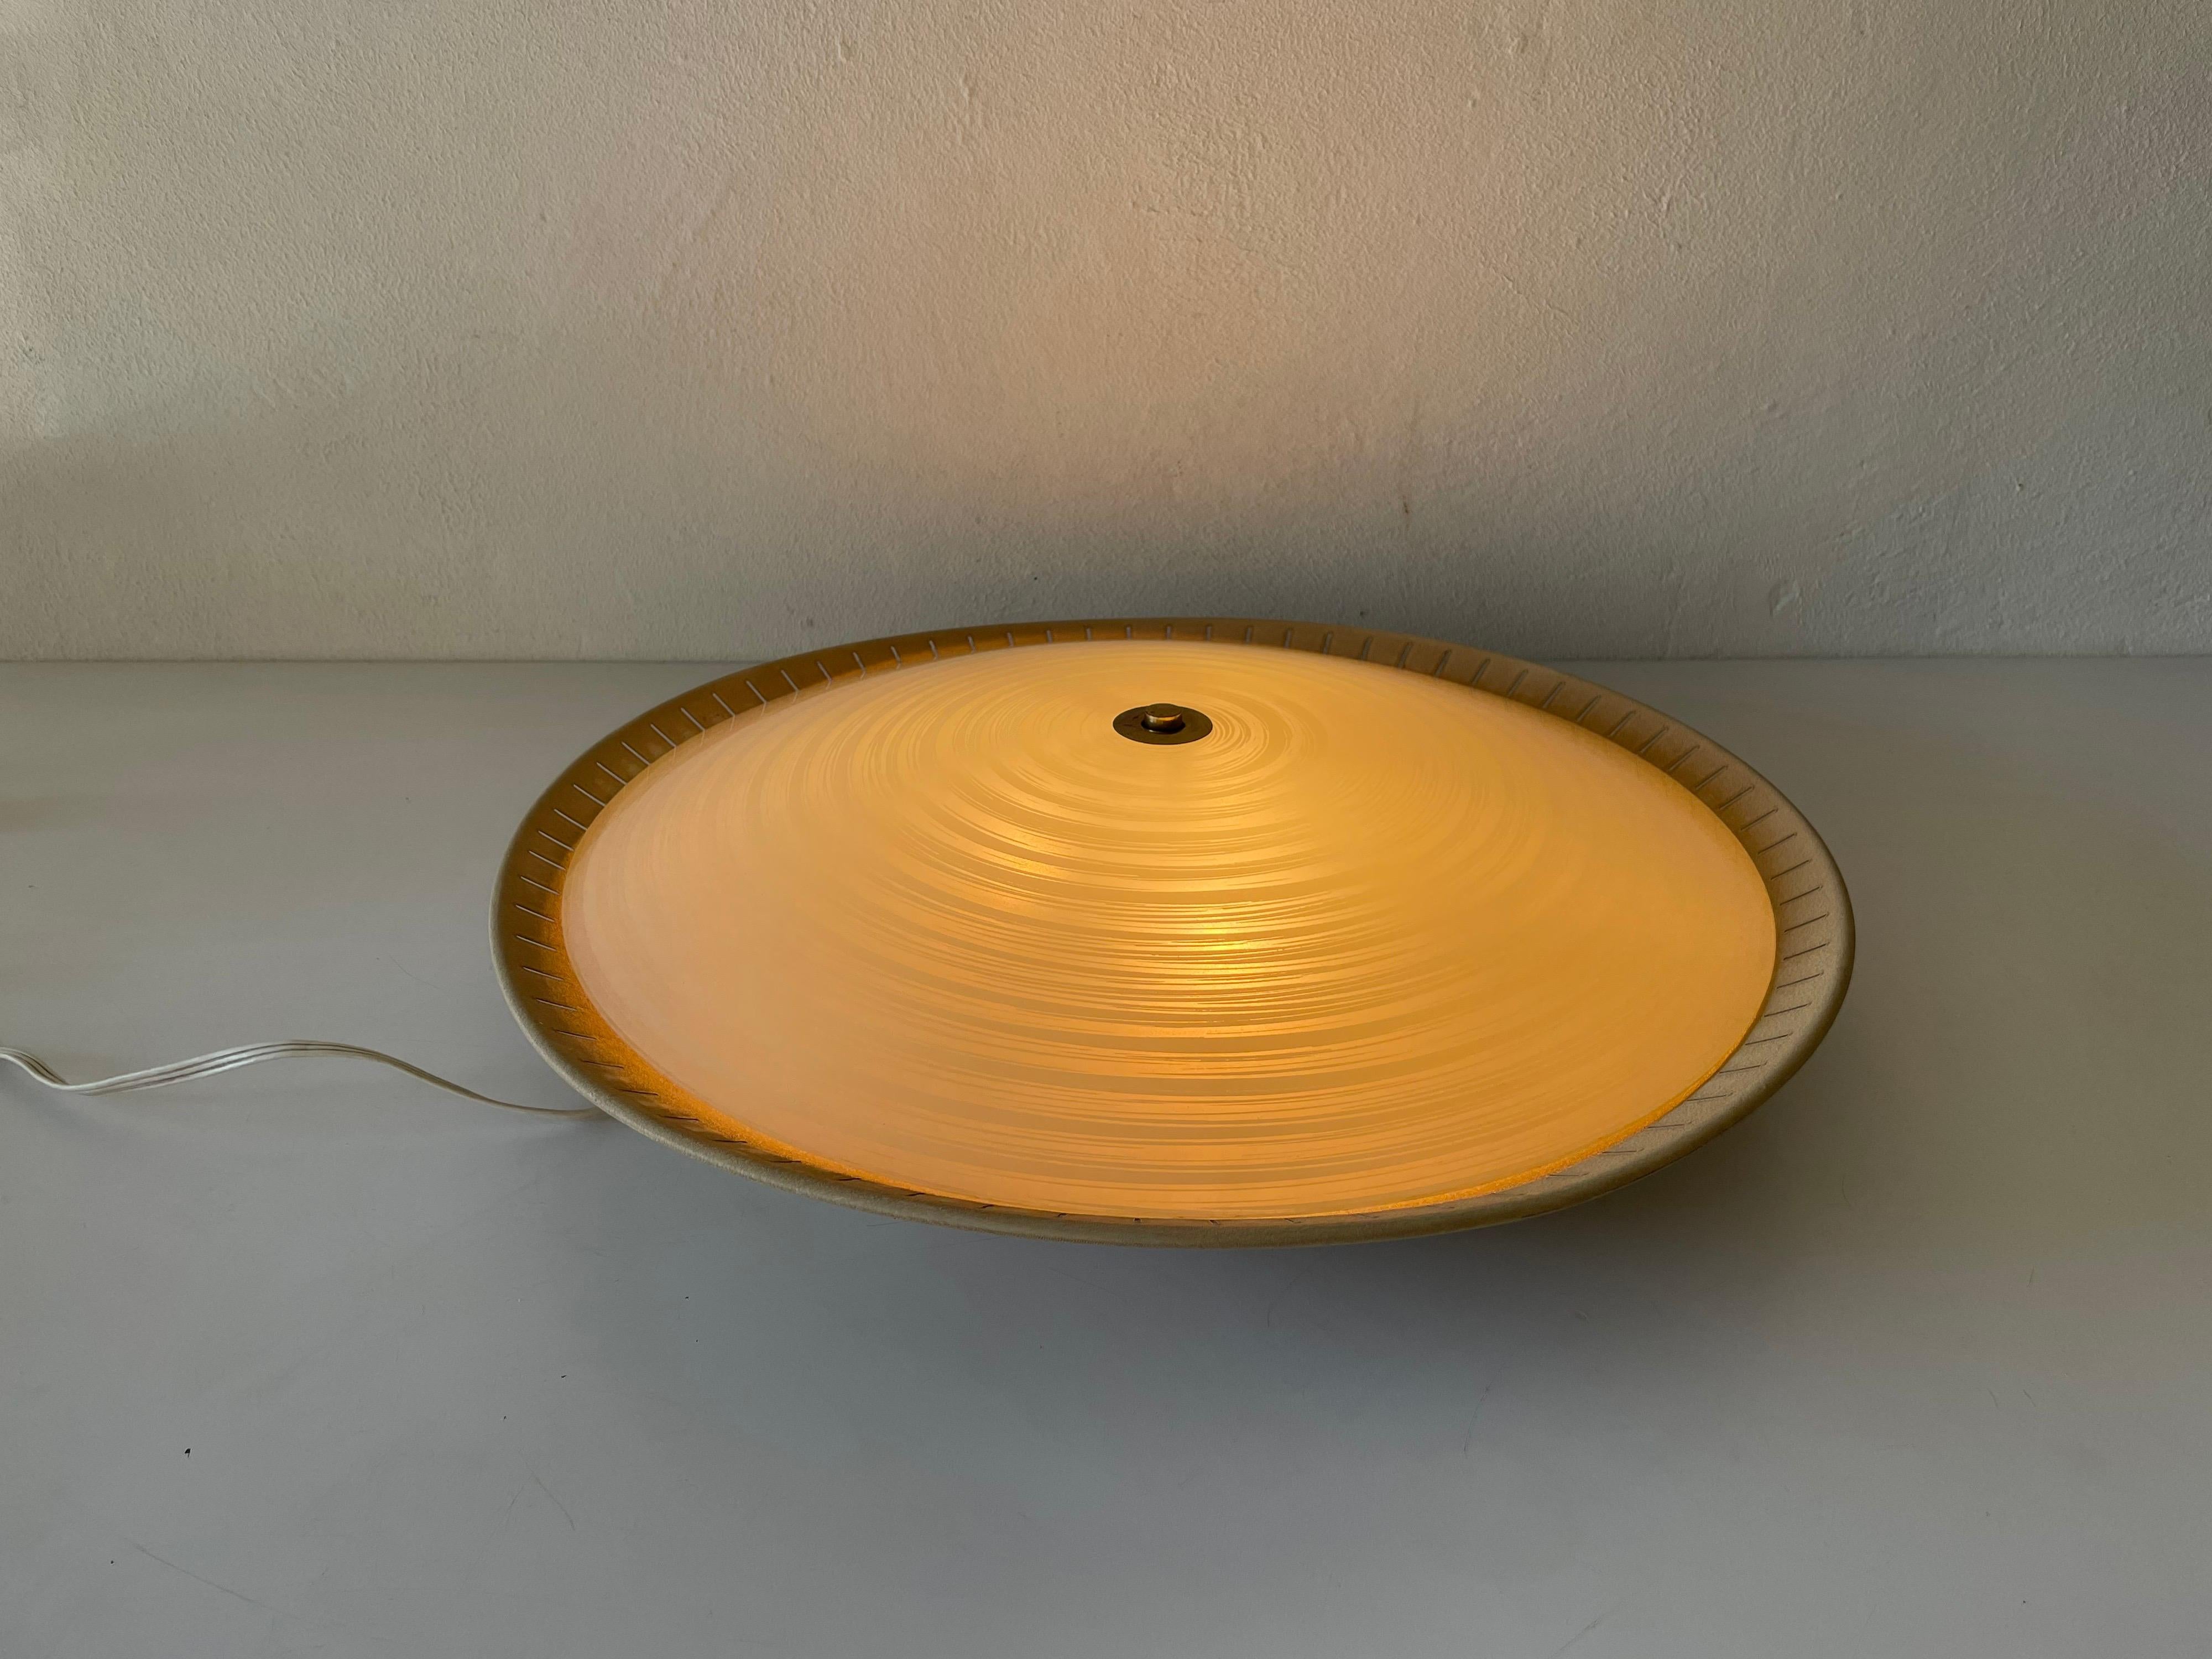 Ufo Design Large Flush Mount Ceiling Lamp by Hillebrand, 1950s, Germany For Sale 4